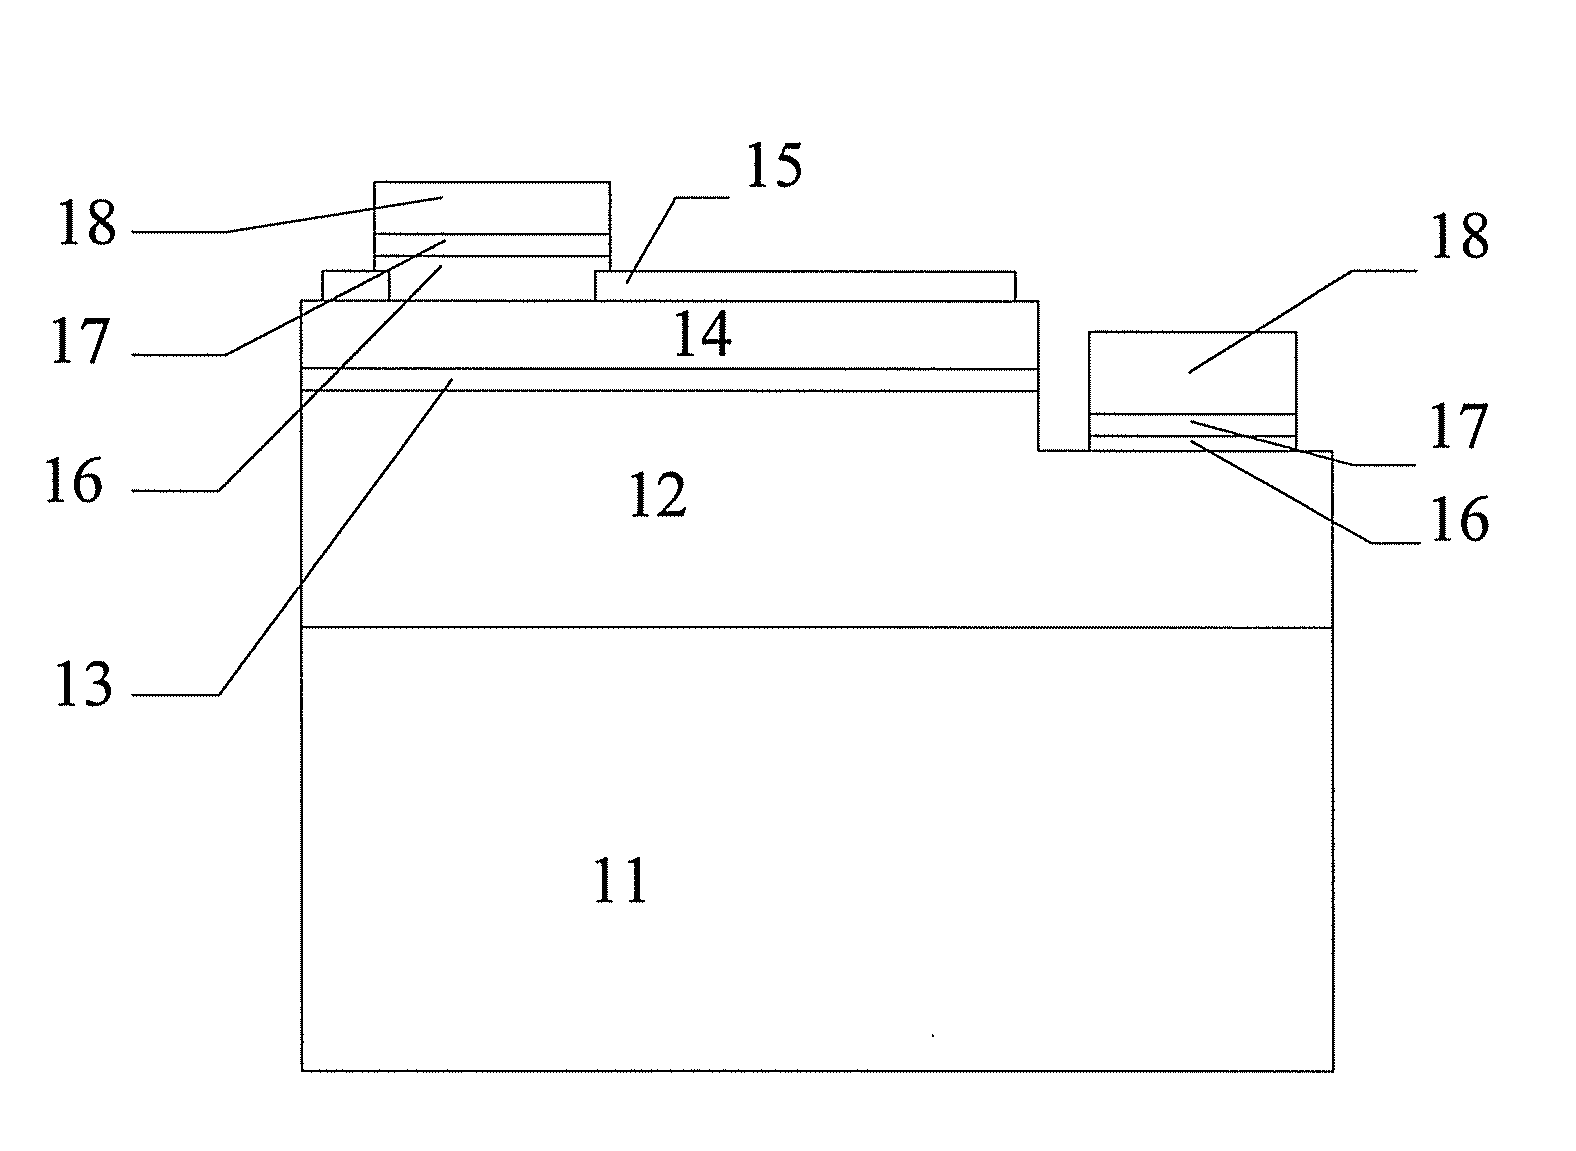 Set of ohmic contact electrodes on both p-type and n-type layers for gan-based LED and method for fabricating the same